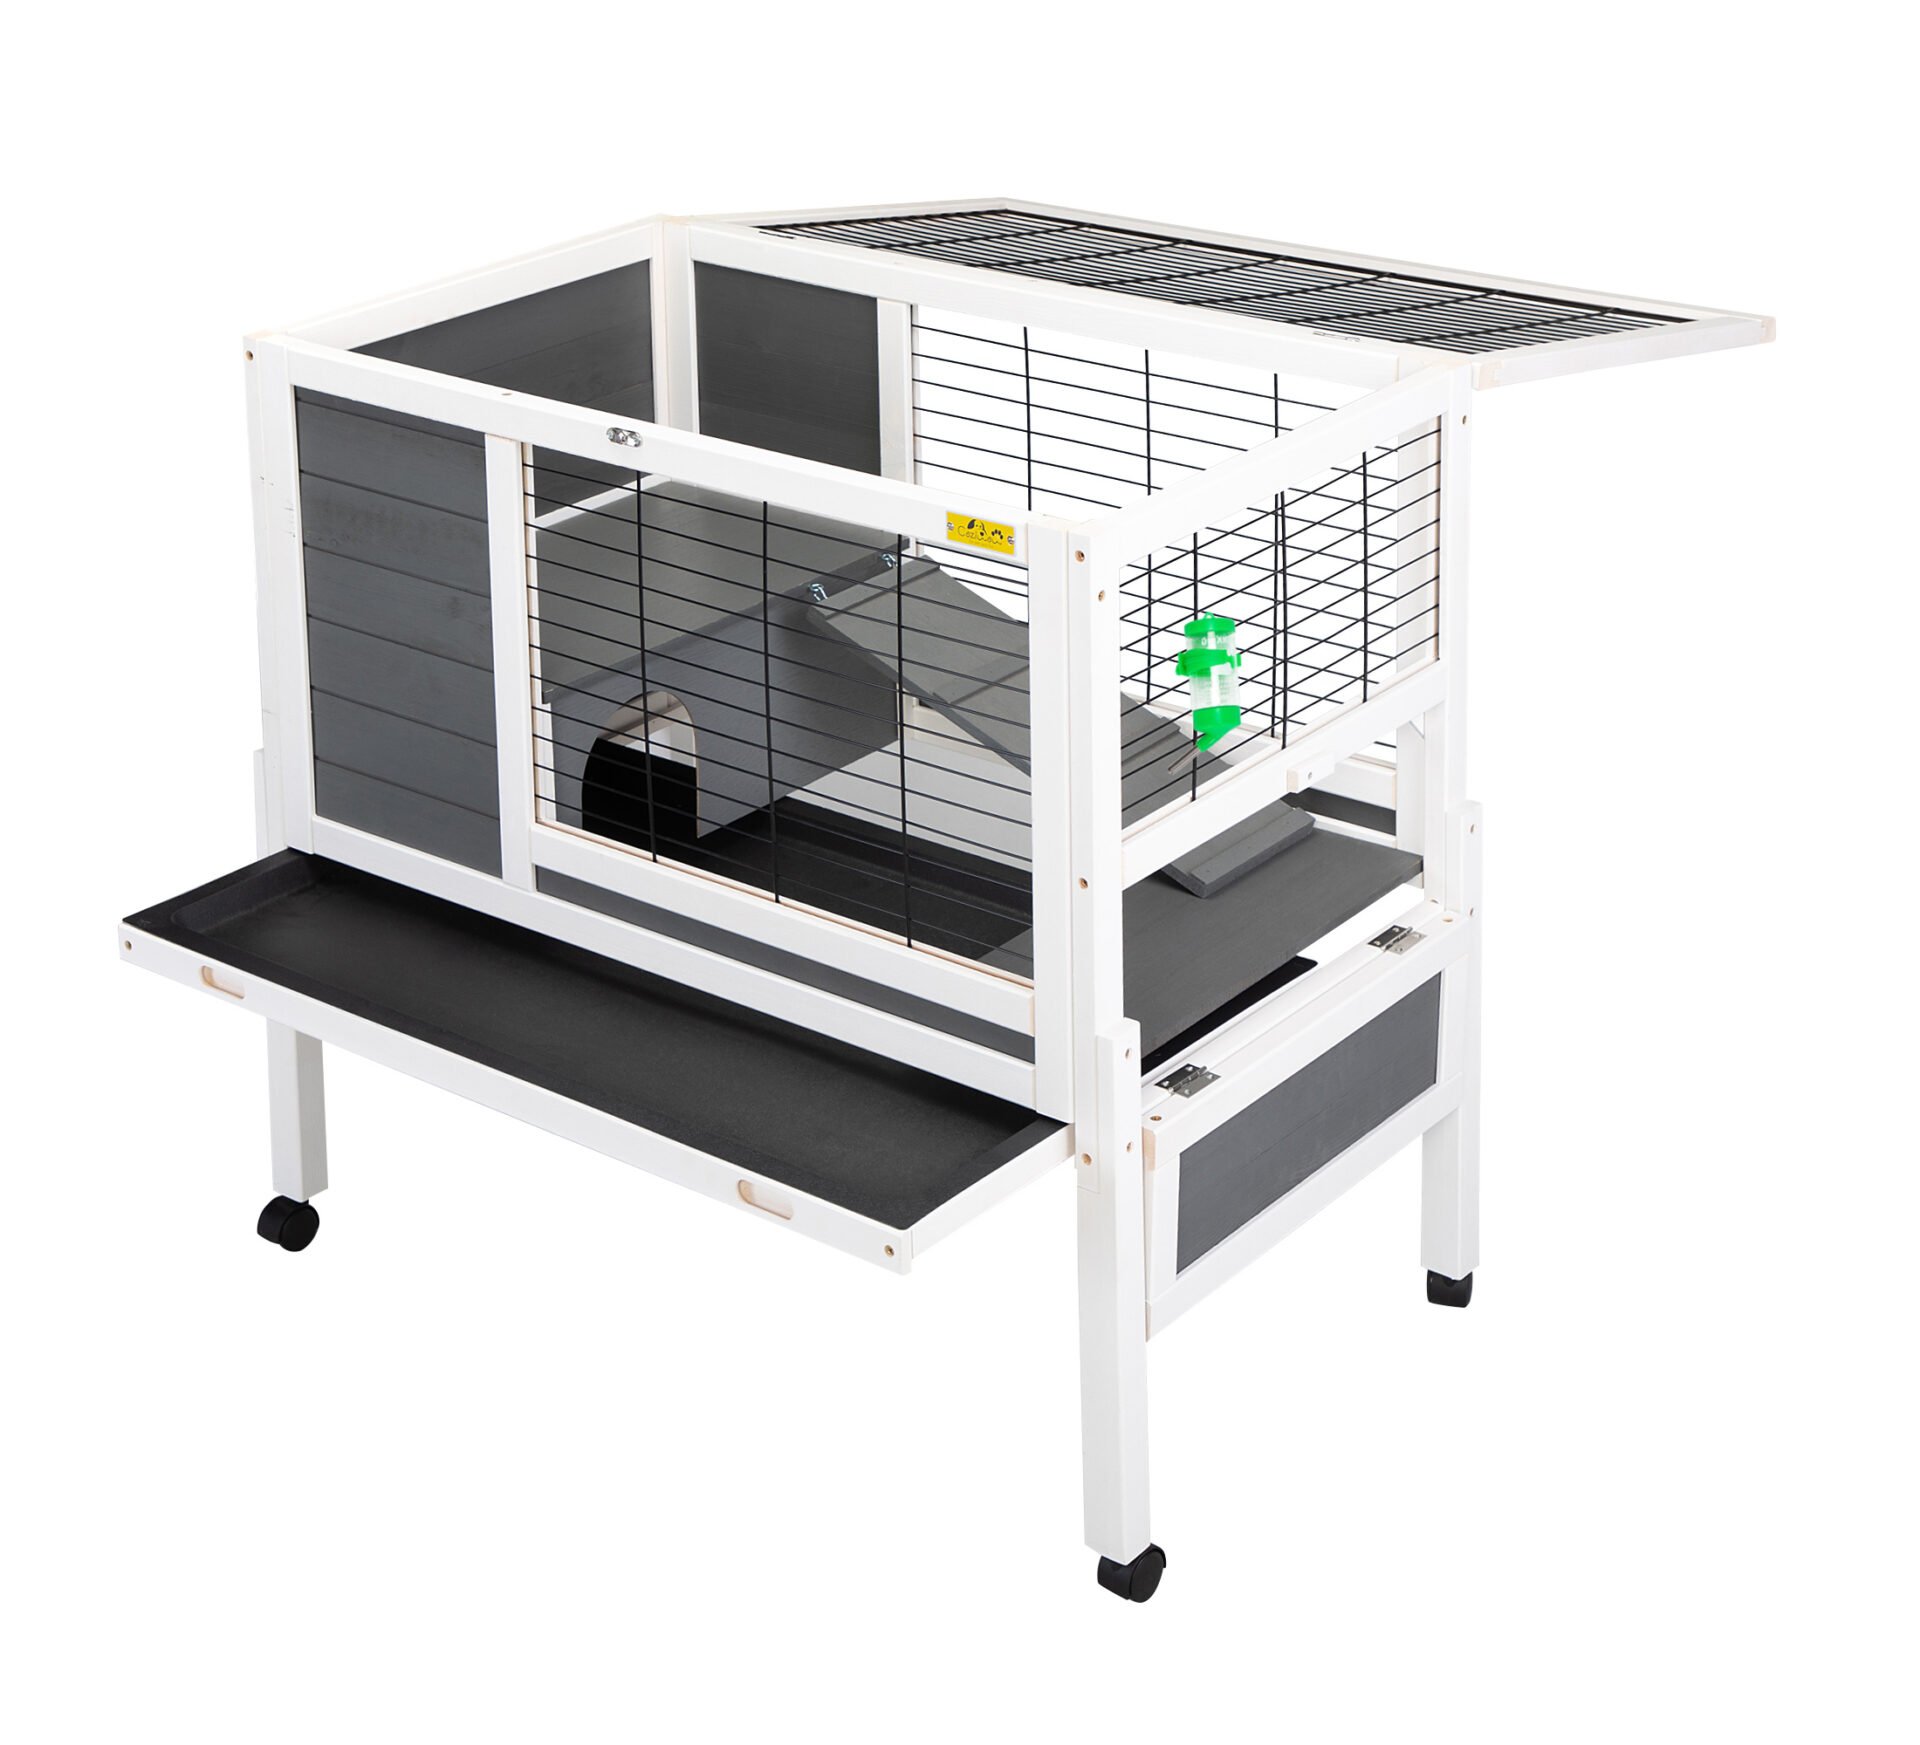 Coziwow 37"L Elevated Wood Rabbit Hutch With 4 Casters, for 1-2 Bunnies, Gray + White CW12G0472 51 1